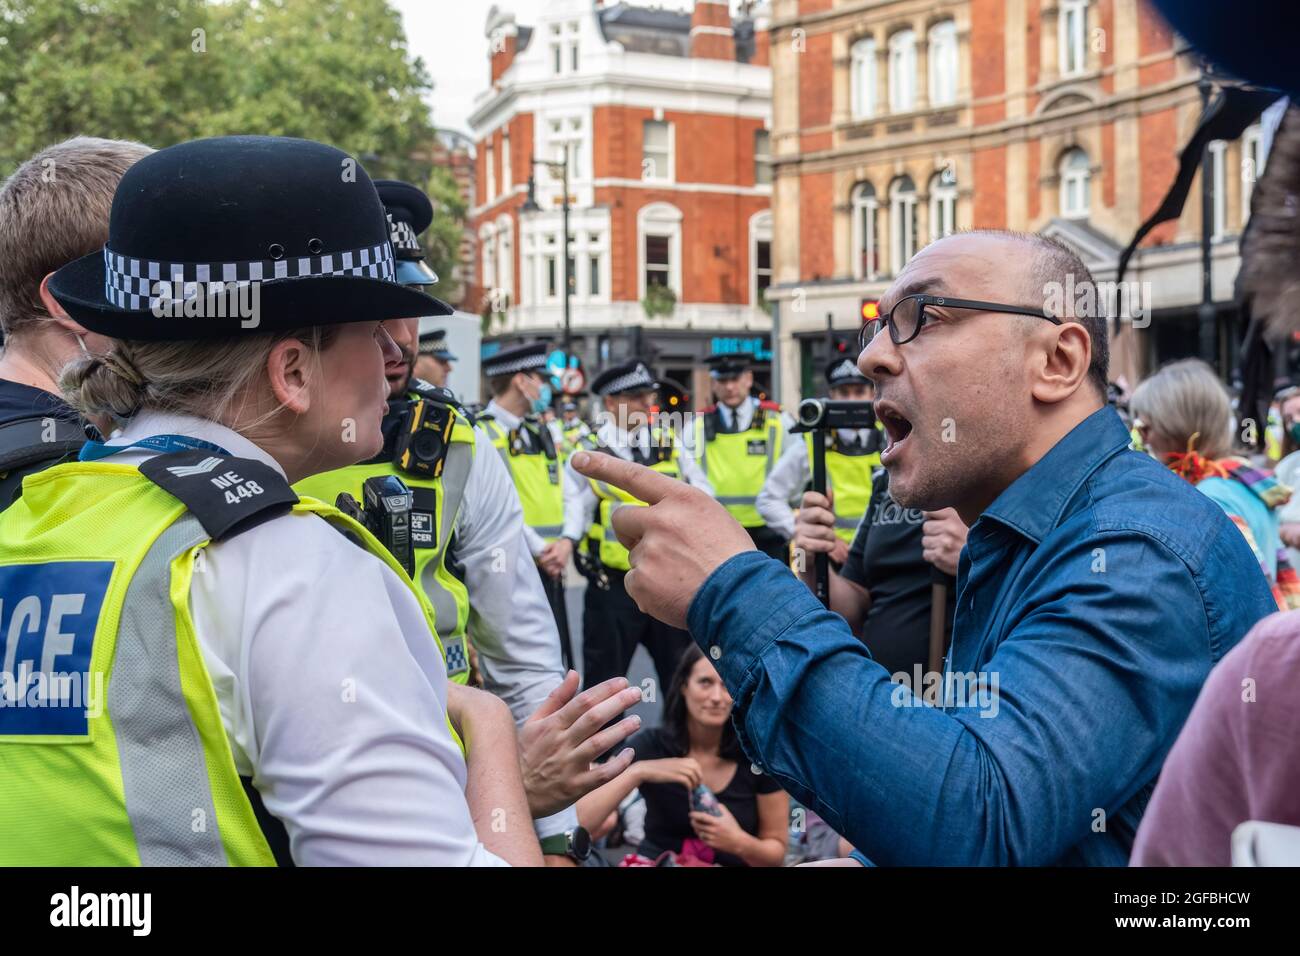 London, UK. 24th Aug, 2021. A man tries to get through police lines and argues with officers, during the demonstration.‘The Impossible Rebellion' protest against climate change, global warming, which plans to target the root cause of the climate and ecological crisis and to demand the government divest from fossil fuel companies by Extinction Rebellion. (Photo by Dave Rushen/SOPA Images/Sipa USA) Credit: Sipa USA/Alamy Live News Stock Photo